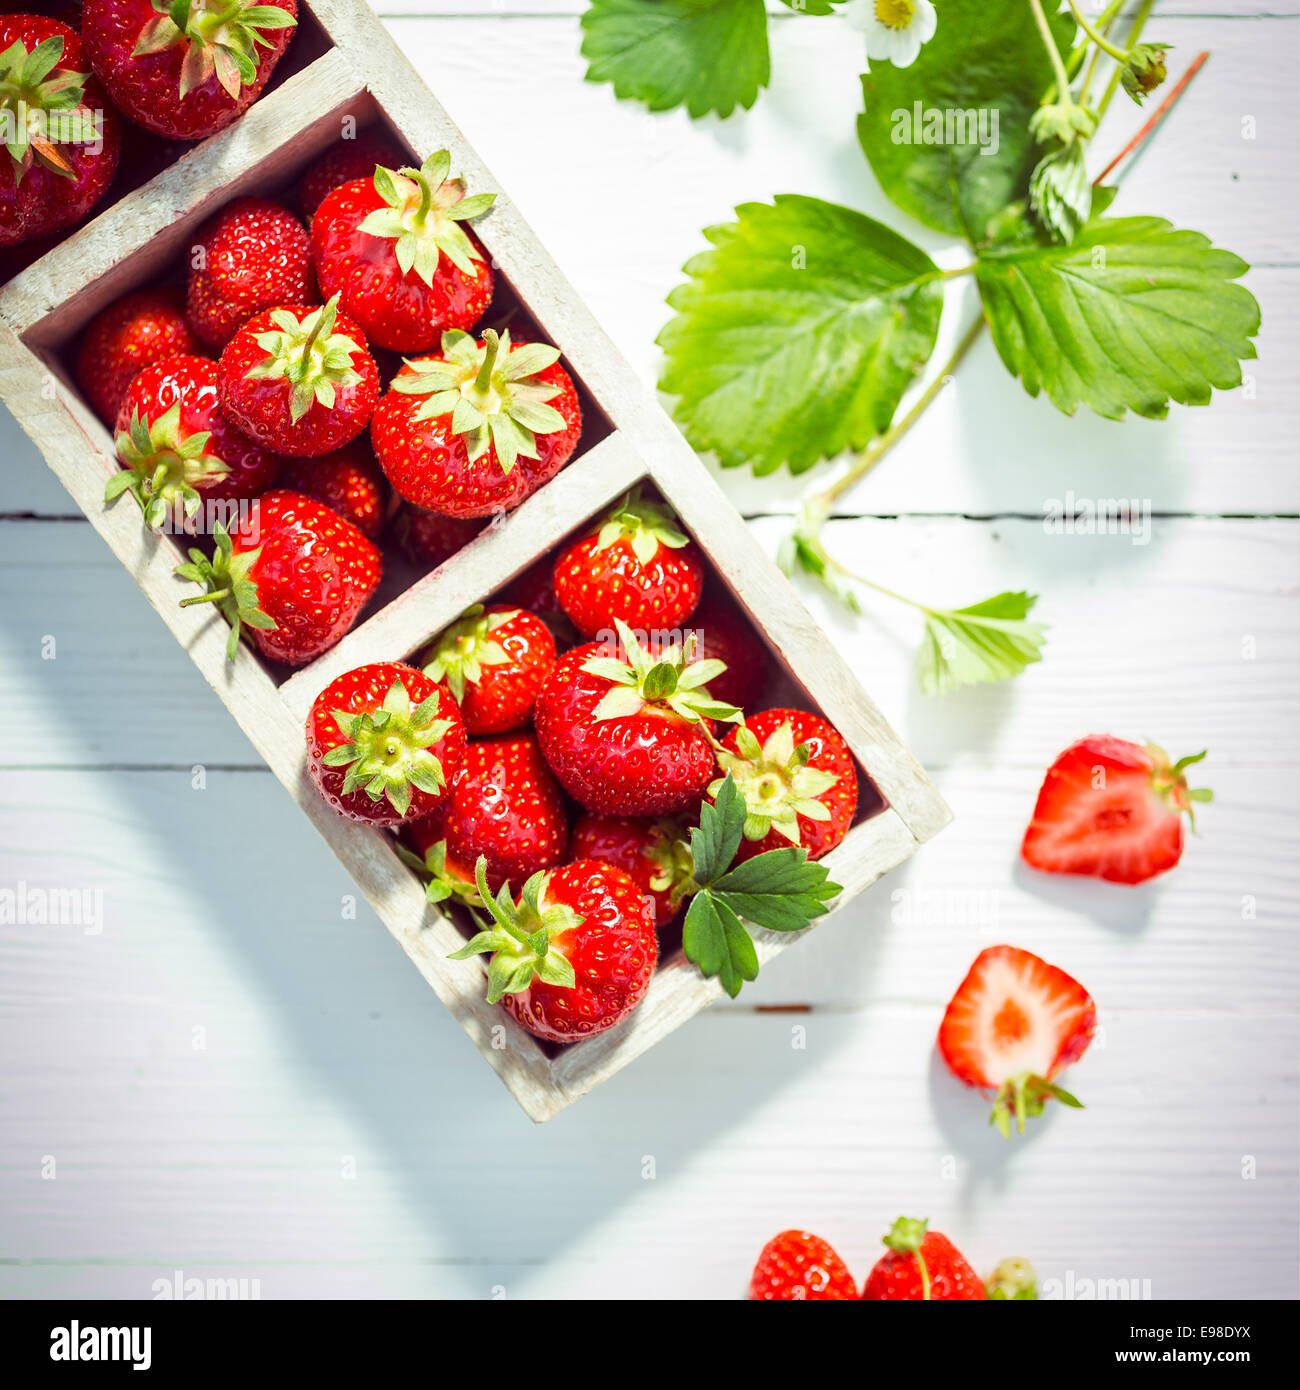 Fresh ripe red strawberries in boxes displayed on white painted wooden boards at a farmers market wih fresh green leaves and a halved berry showing the succulent pulp, overhead view Stock Photo